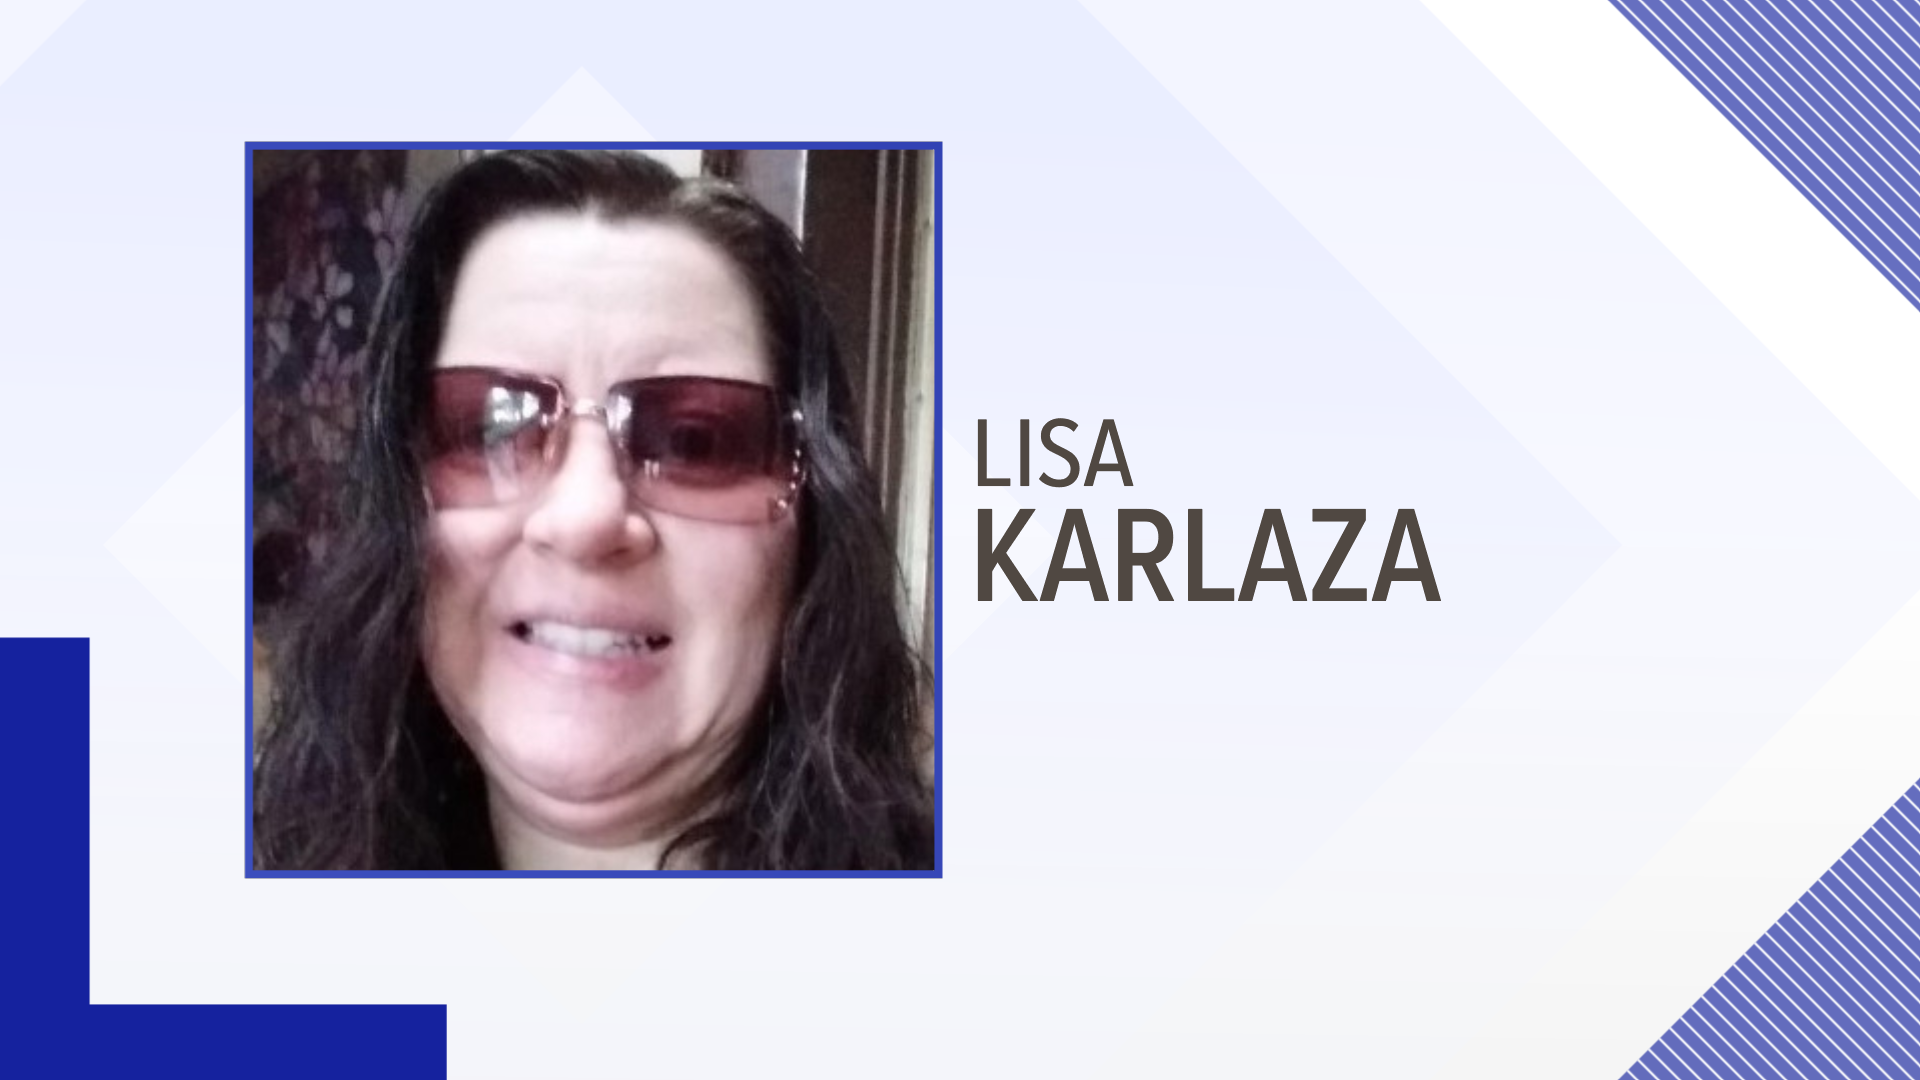 Police say Lisa Karlaza, 53, stabbed her husband to death and then told officers he died in a home invasion.